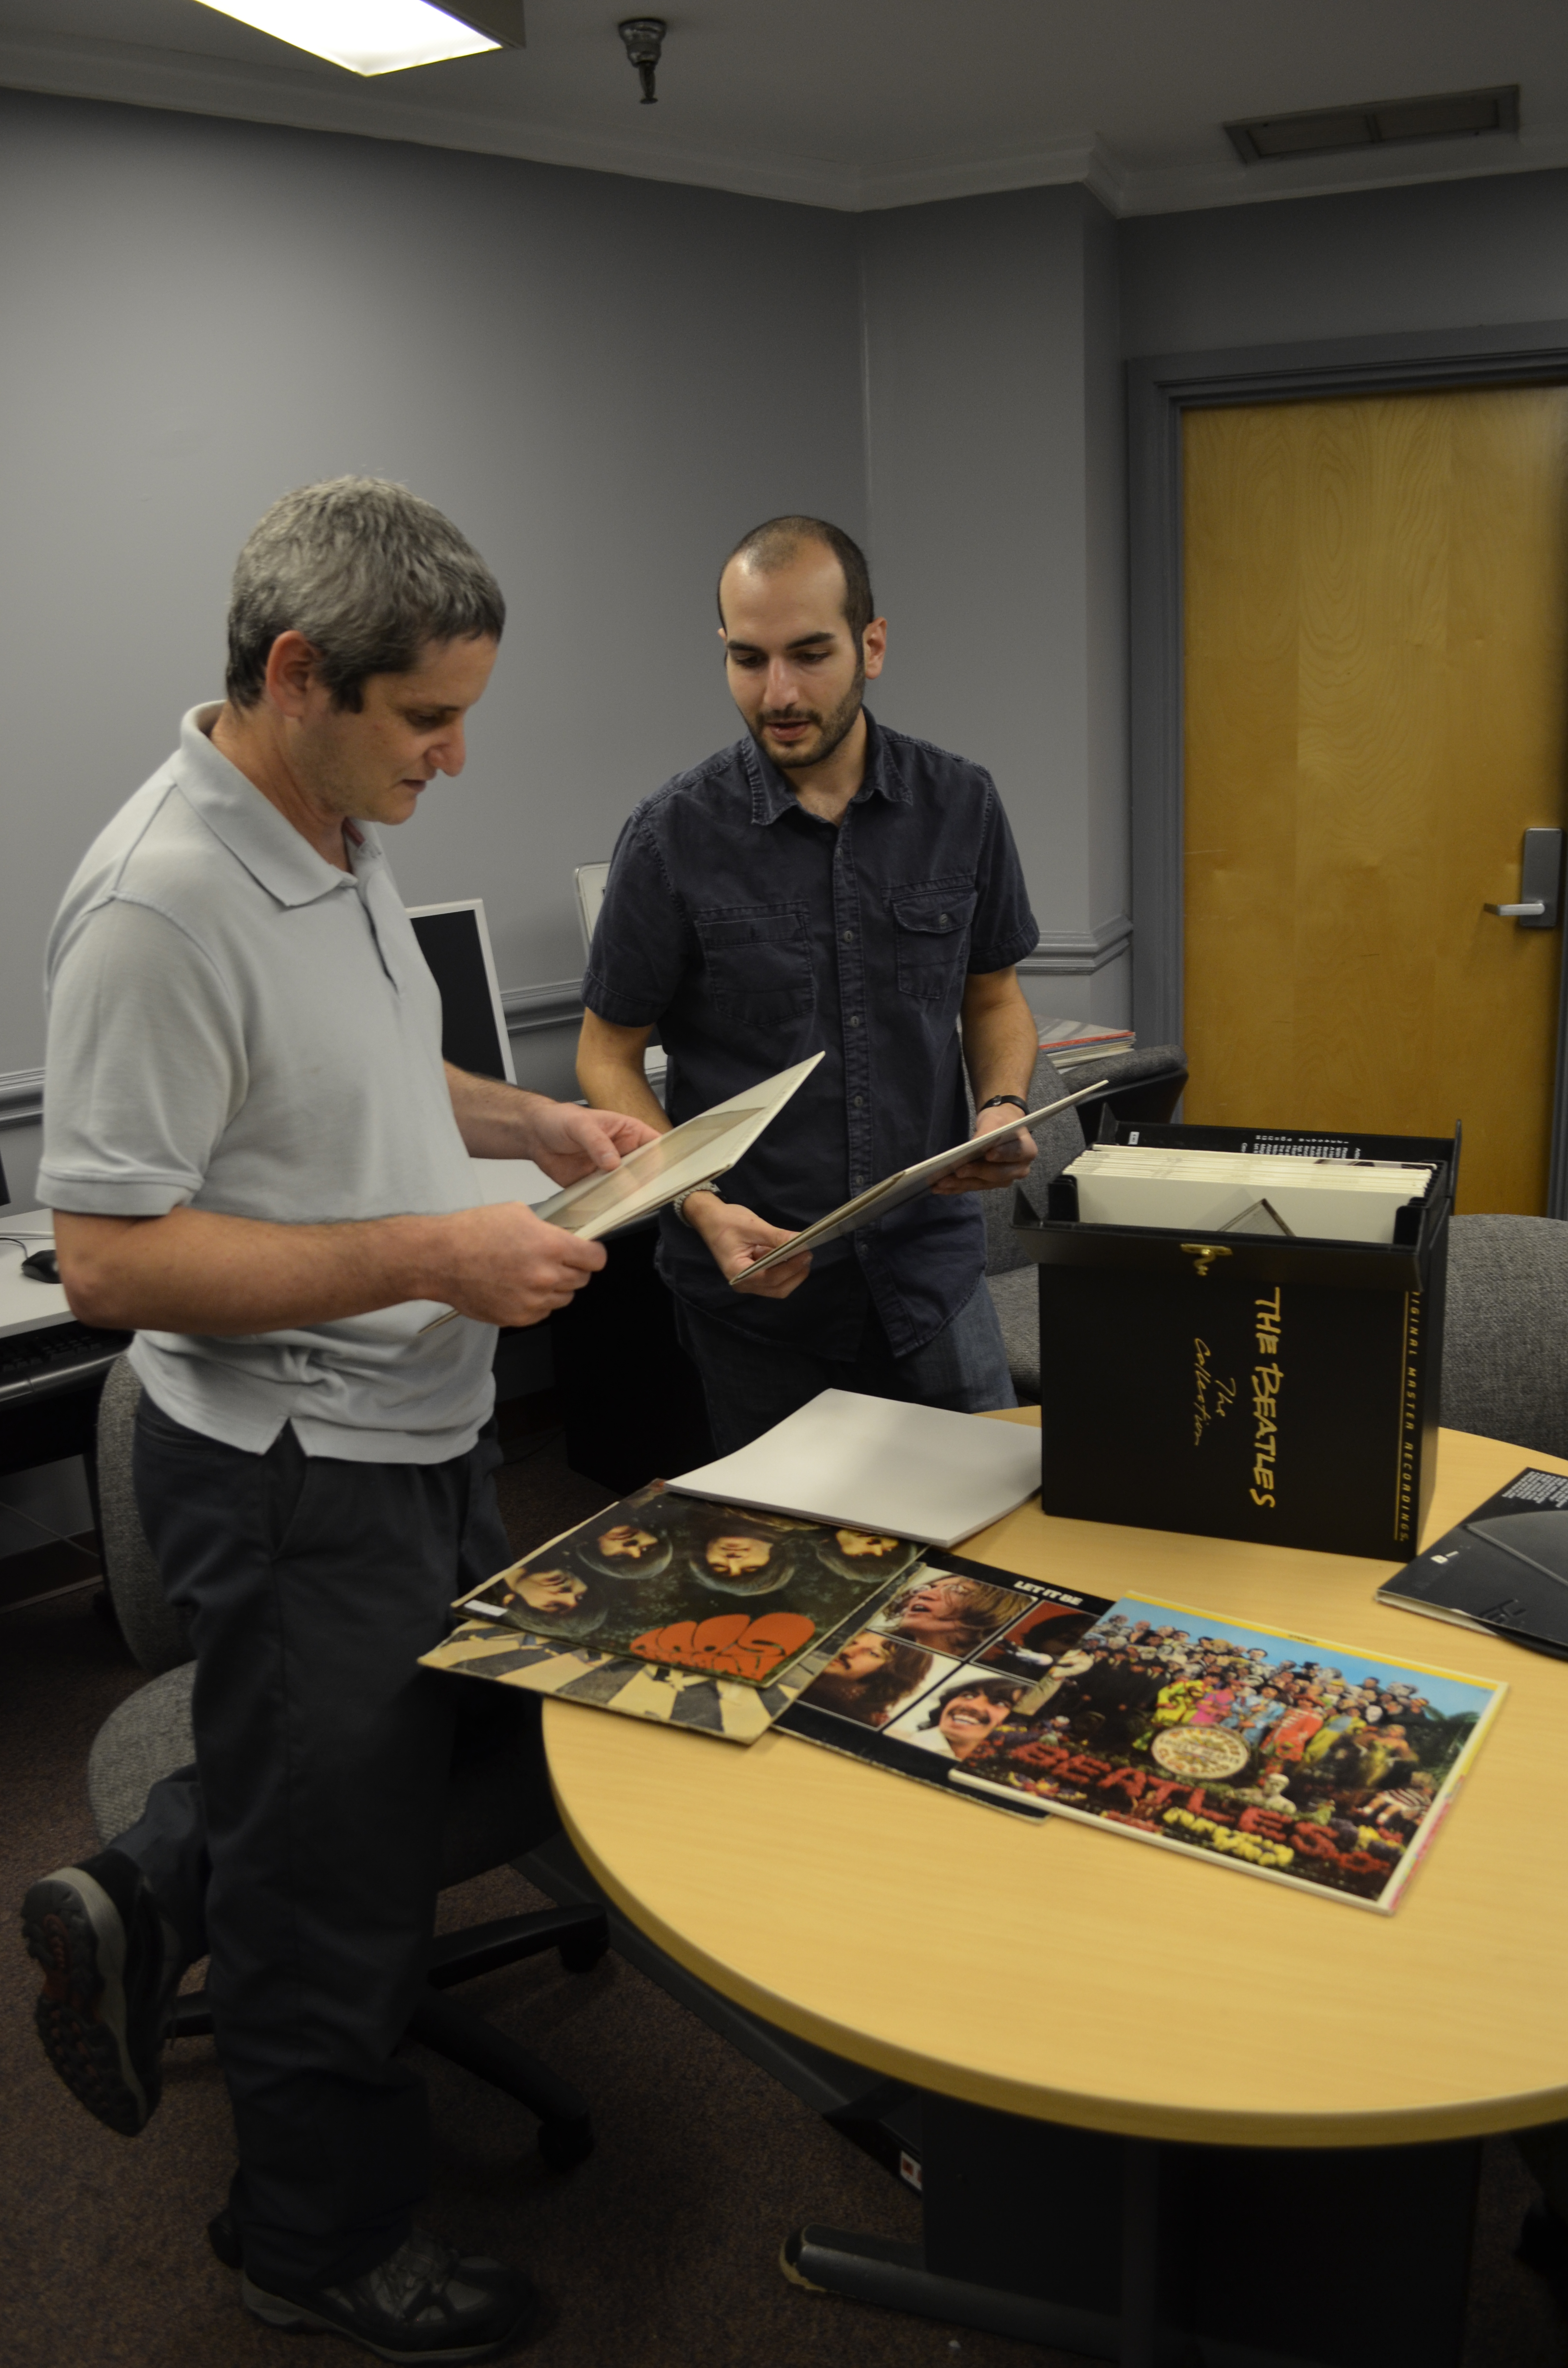 Lawrence Tech Associate Professor Lior Shamir (left) and graduate student Joe George look over the liner notes on some of the Beatles albums that they analyzed in a recent research study.